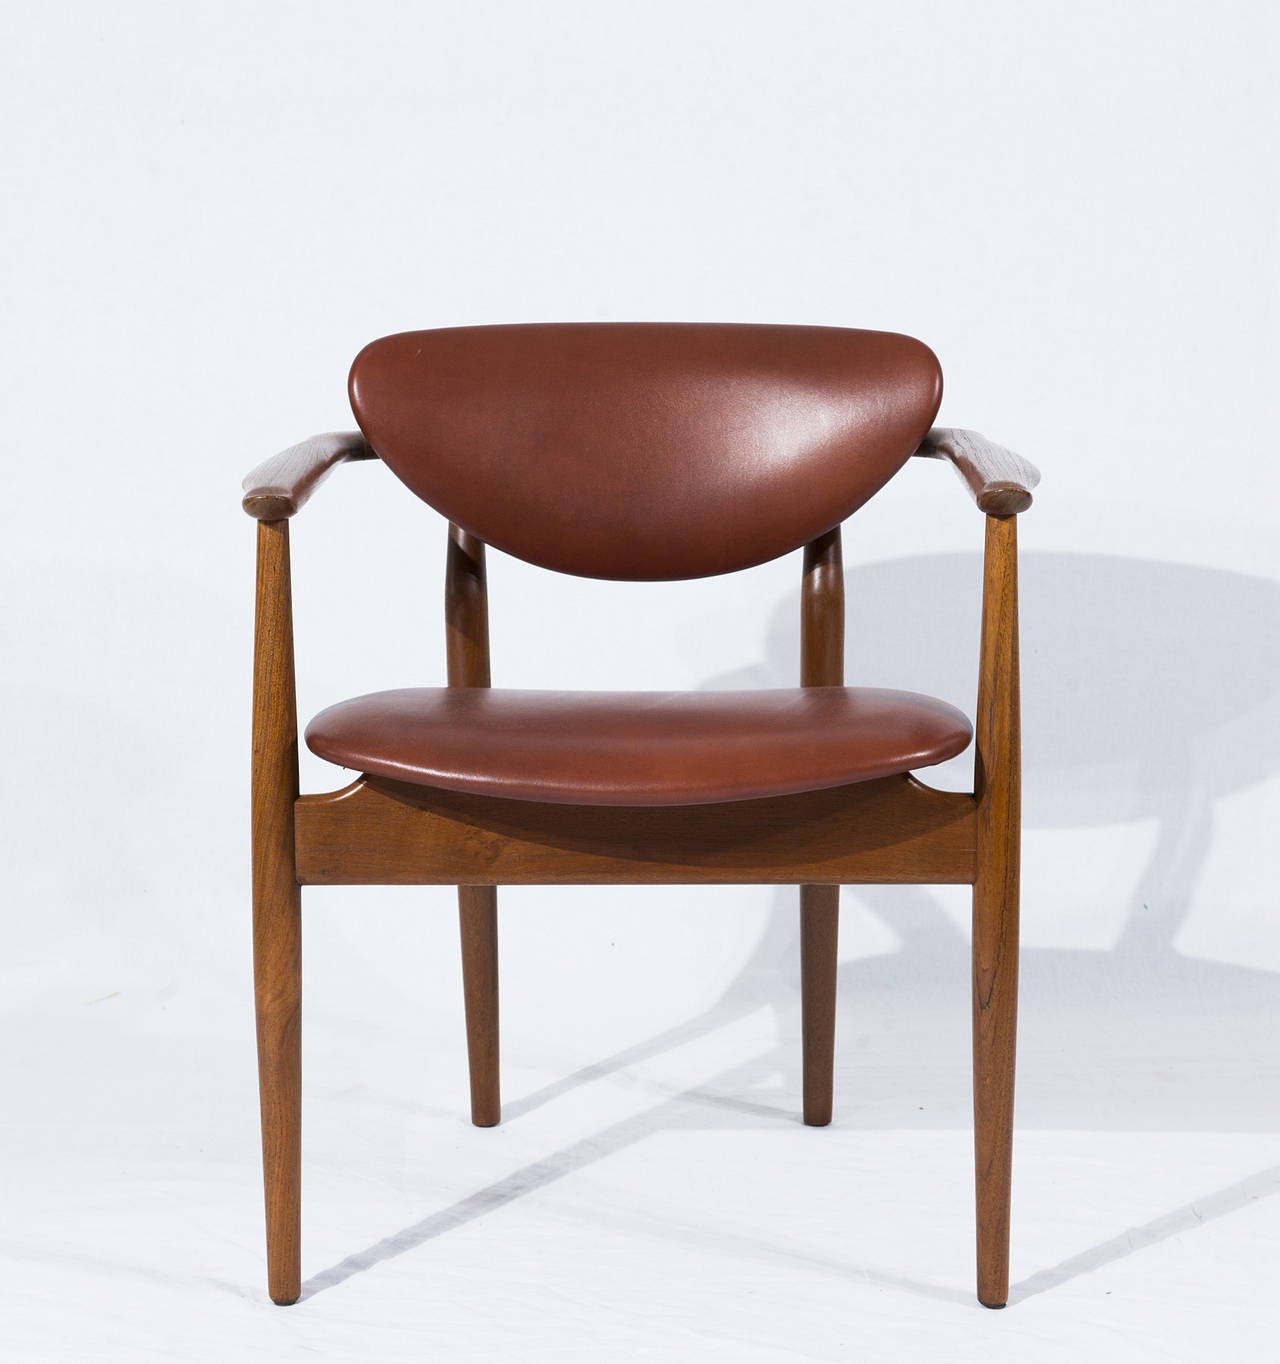 Finn Juhl NV 55 (also known as FJ 55) armchair designed in 1955 and produced by Niels Vodder. Chair is signed Niels Vodder.  Store formerly known as ARTFUL DODGER INC